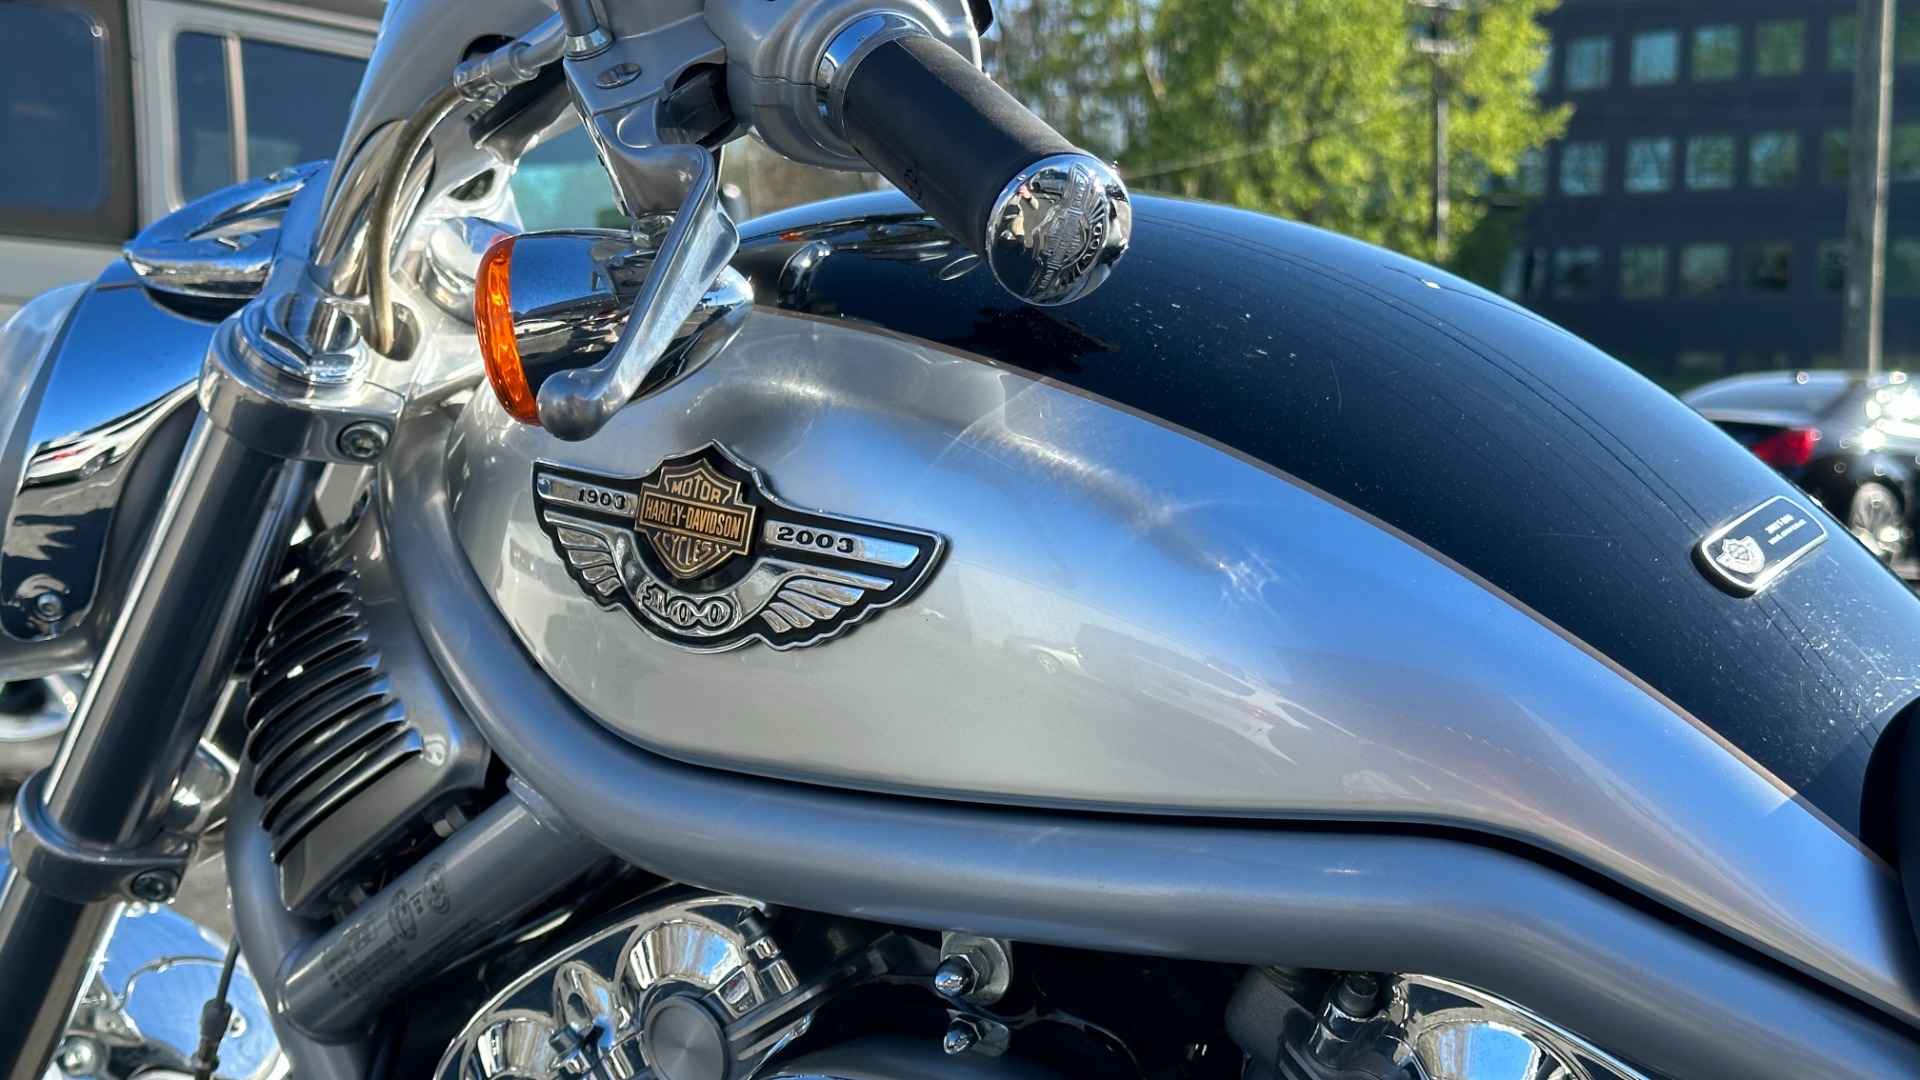 Used 2003 Harley Davidson V Rod ANNIVERSARY EDITION / 1130CC ENGINE / BREMBO BRAKES / VORTEX AIR SCOOPS for sale $7,695 at Formula Imports in Charlotte NC 28227 41